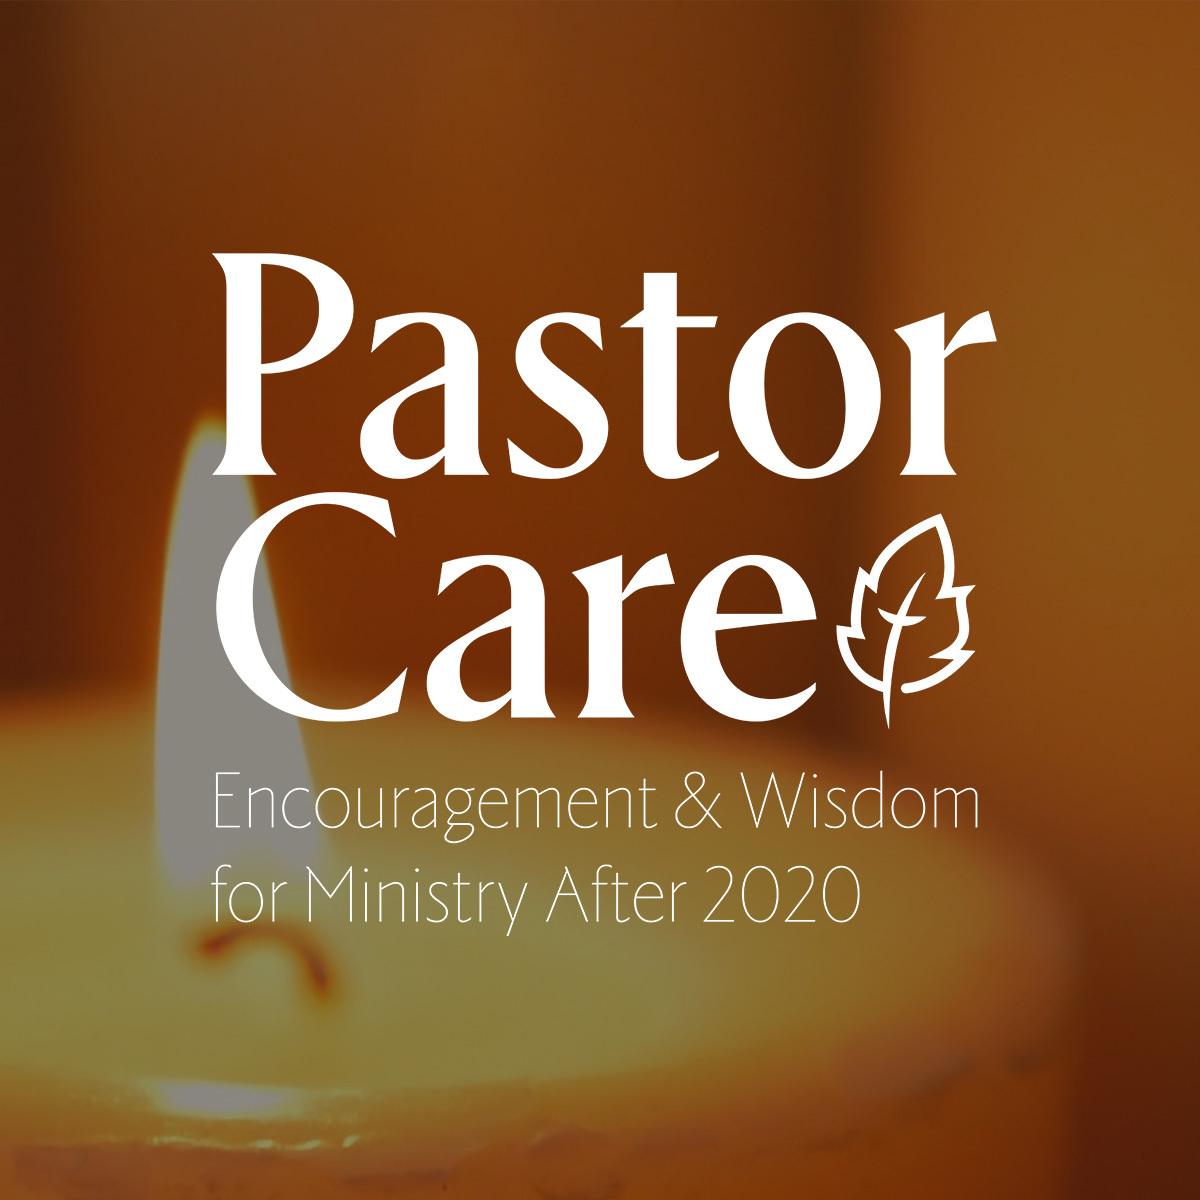 Featured image for Adversity in the Church, Humility in the Pastor (Session 1: Pastor Care)